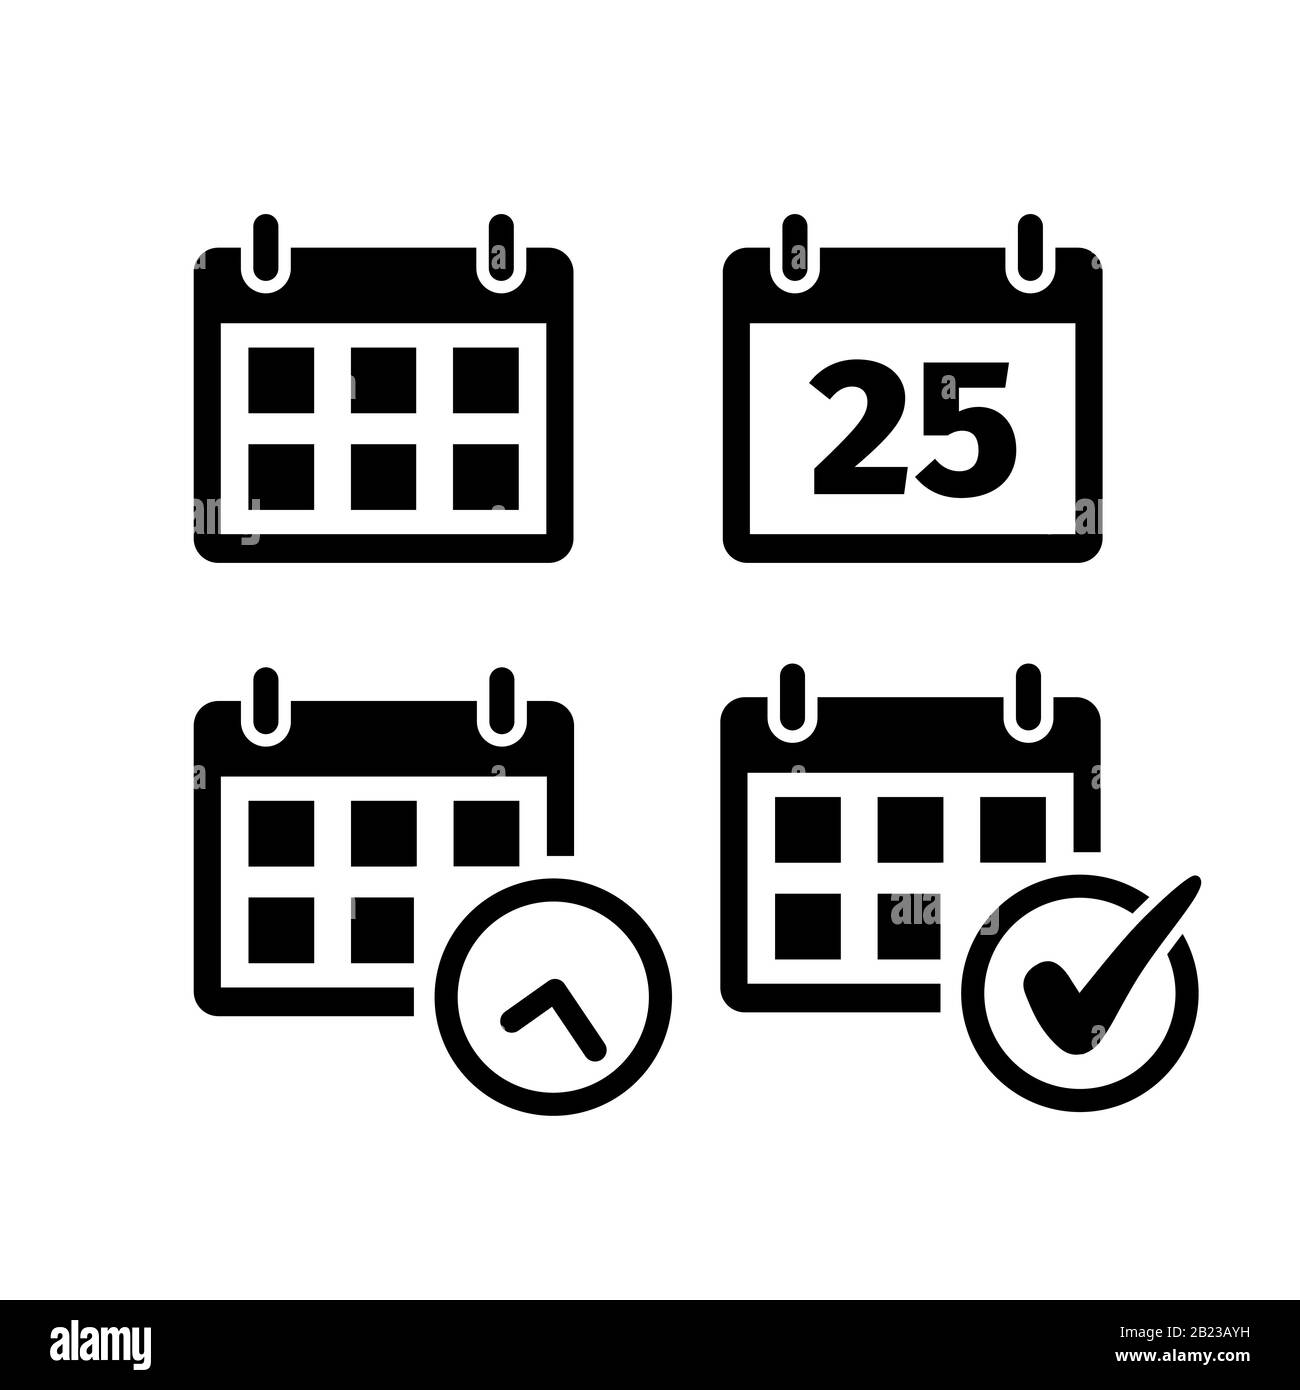 Calendar icon set in flat style on white. Stock Vector